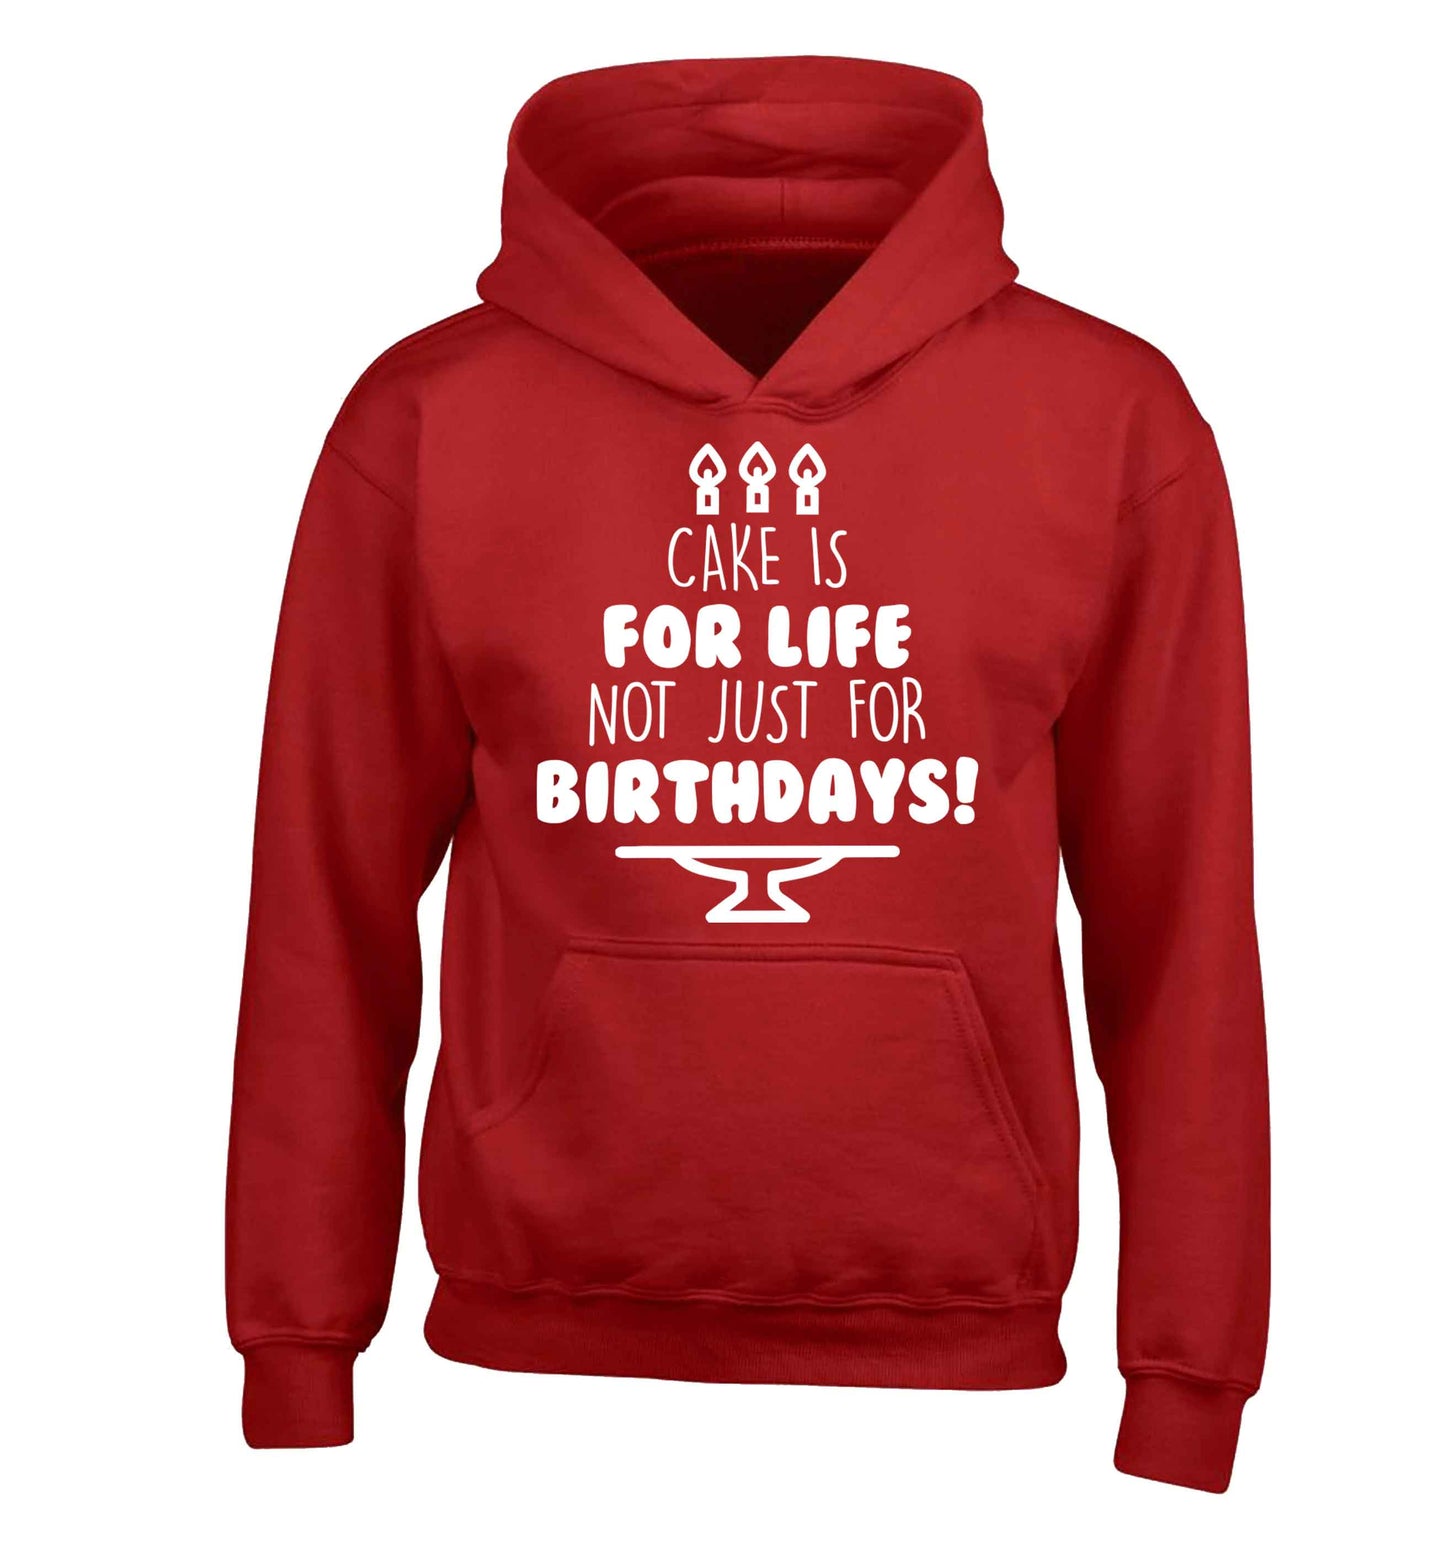 Cake is for life not just for birthdays children's red hoodie 12-13 Years